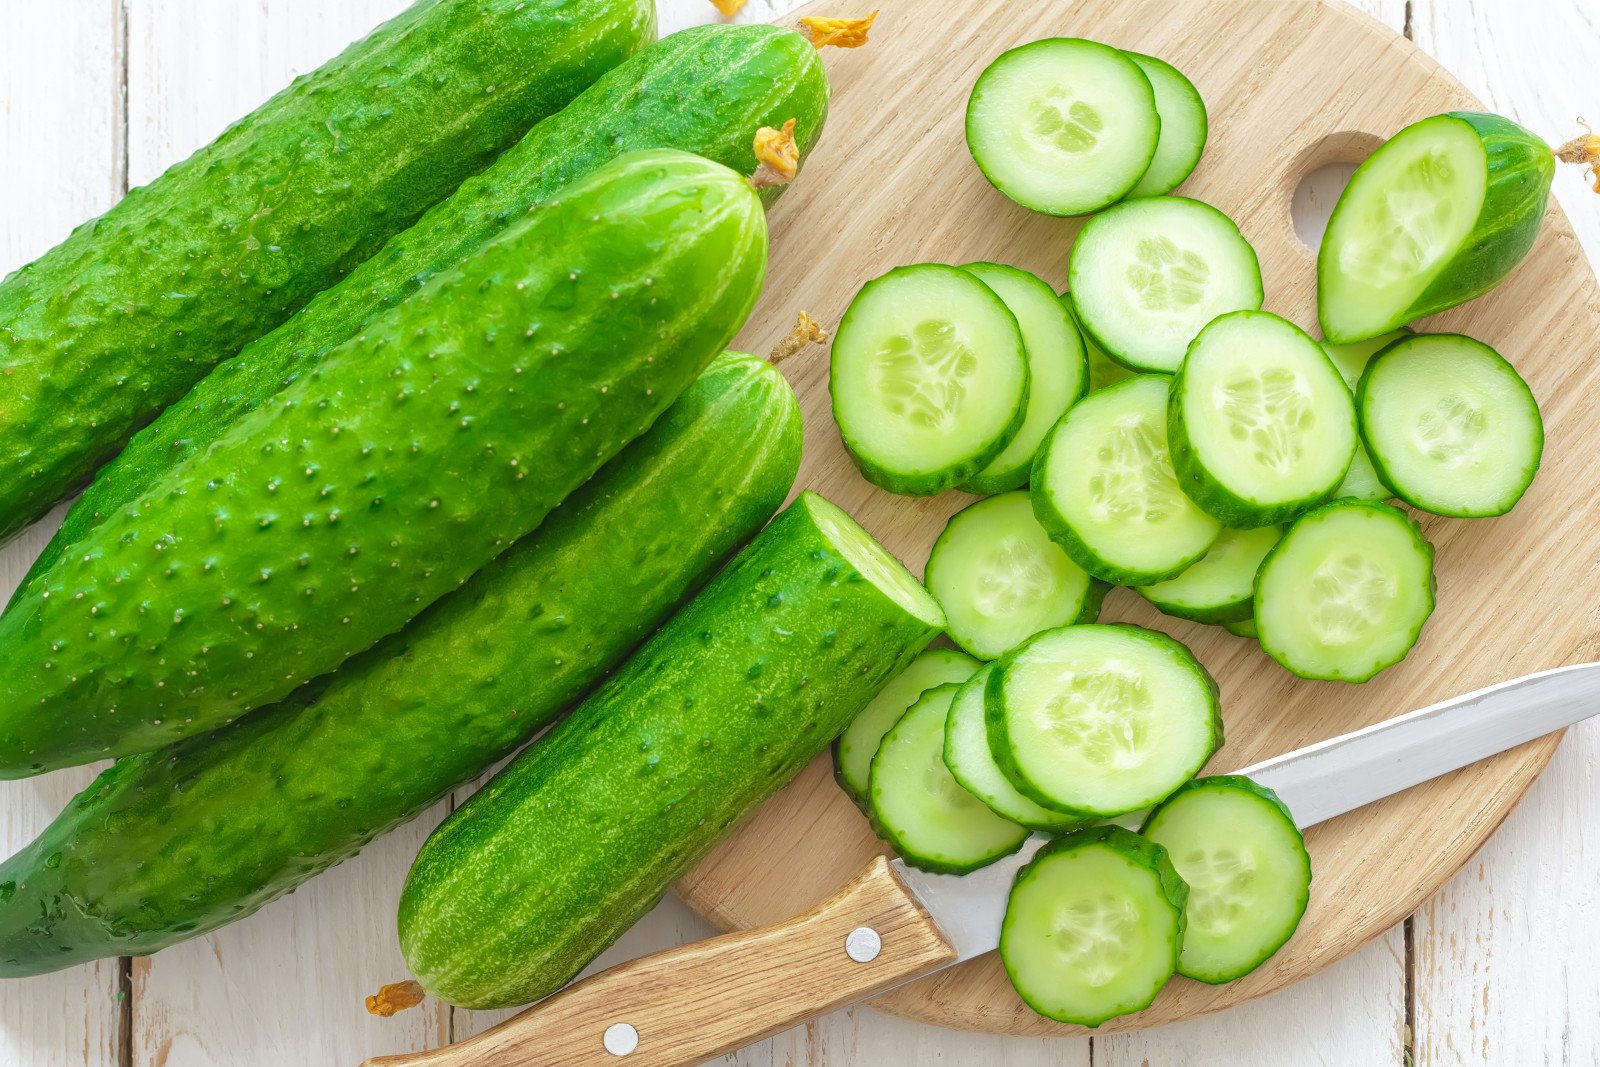 Are Cucumbers a Fruit or Vegetable? - Healthy Green Kitchen